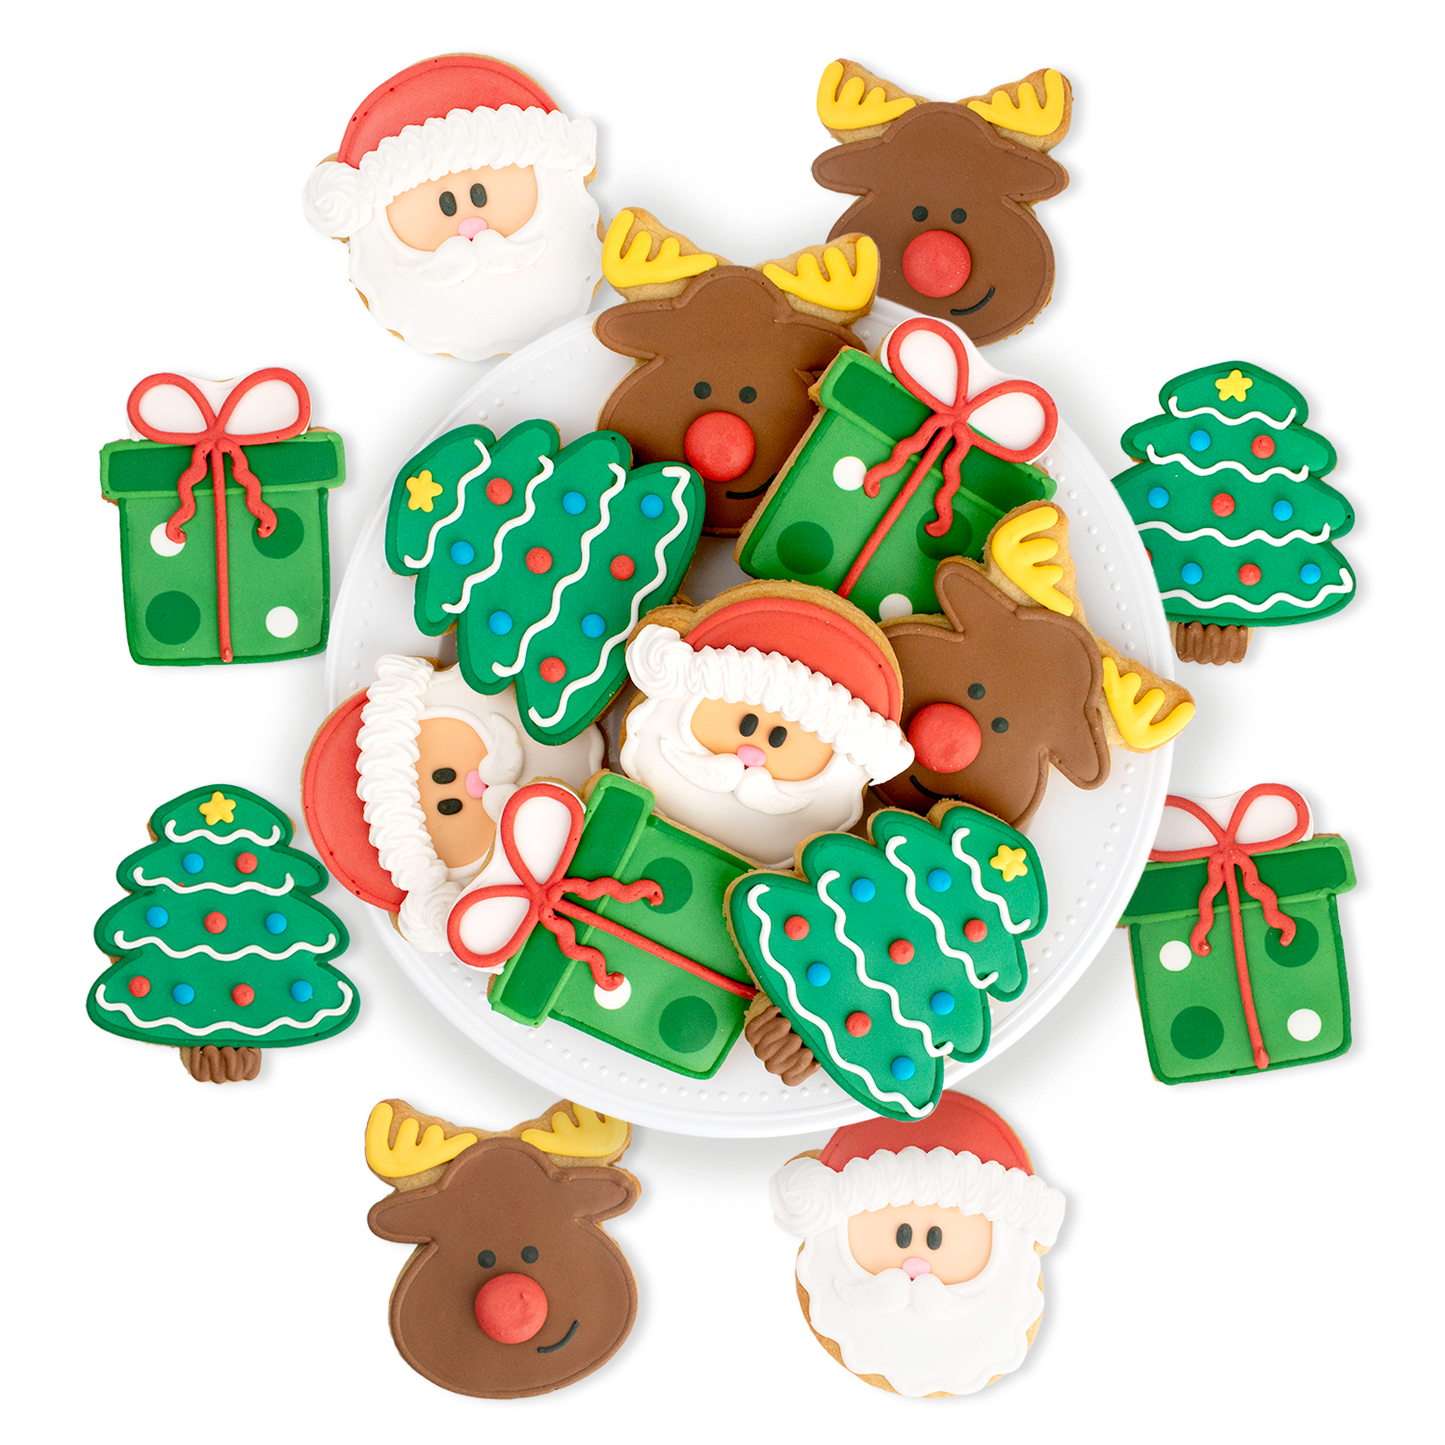 Christmas Hand-Decorated Cookies - 16 ct